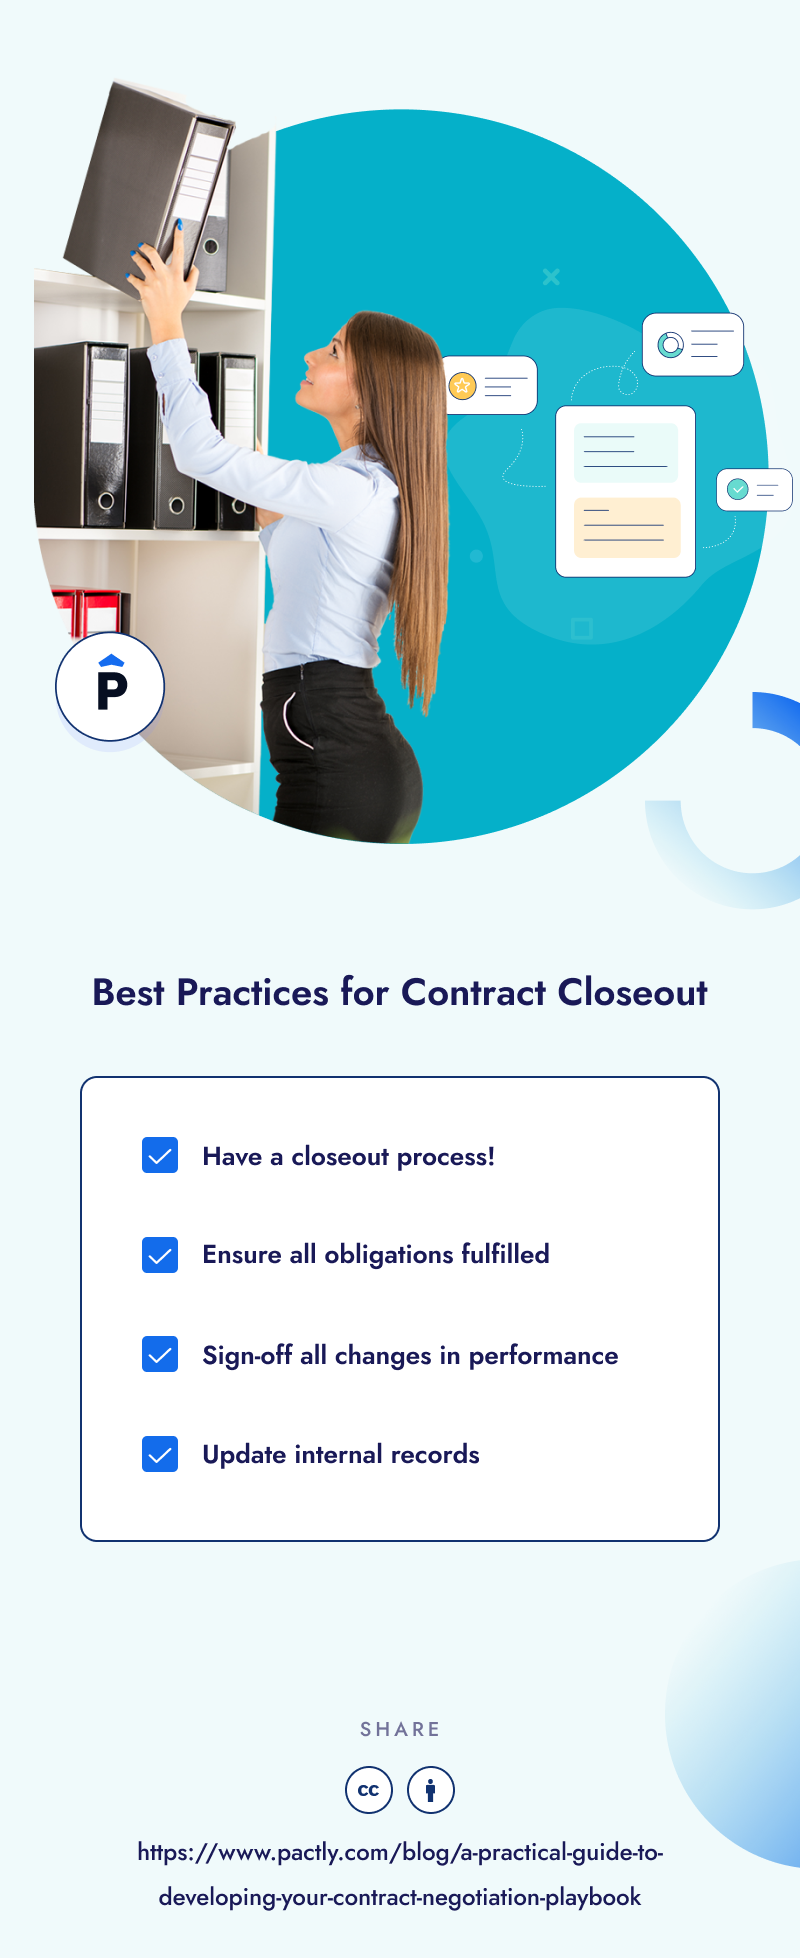 Best practices for contract closeout